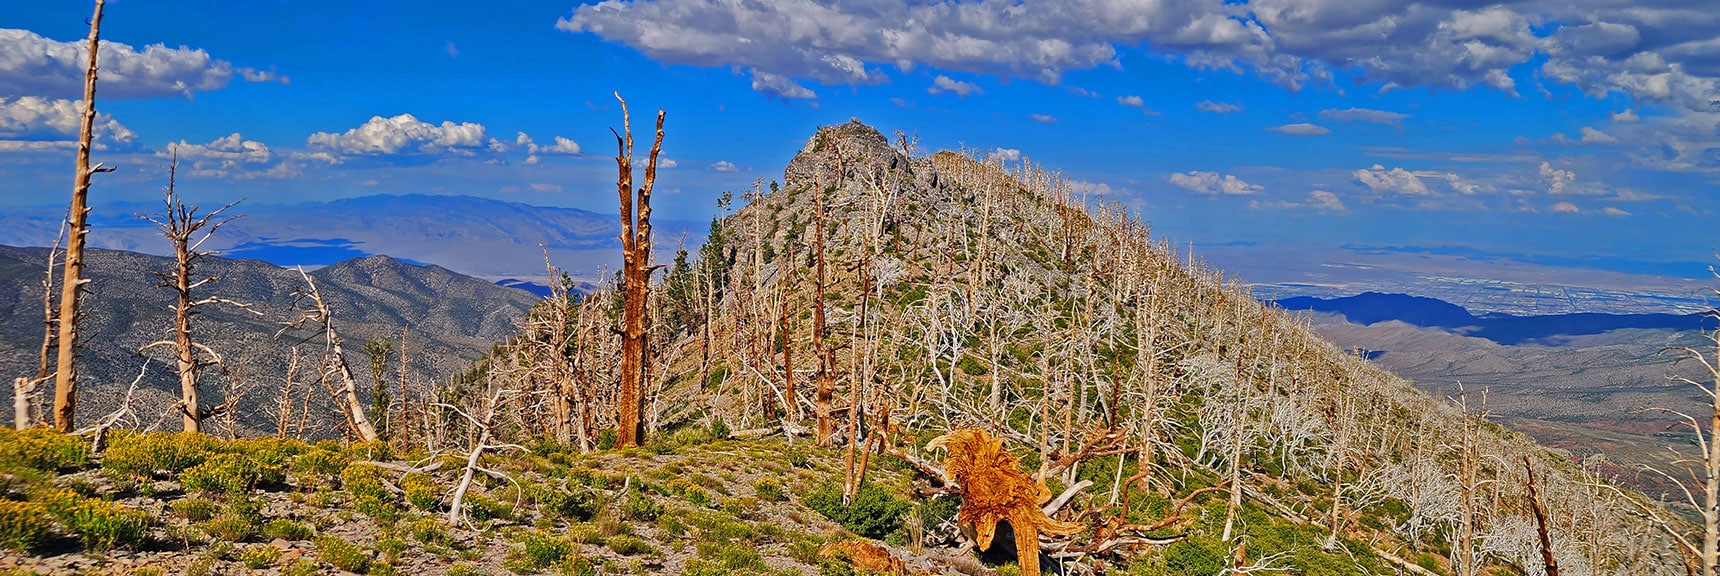 View Back to False Summit from Saddle Below. | Harris Mountain Triangle | Mt Charleston Wilderness, Nevada